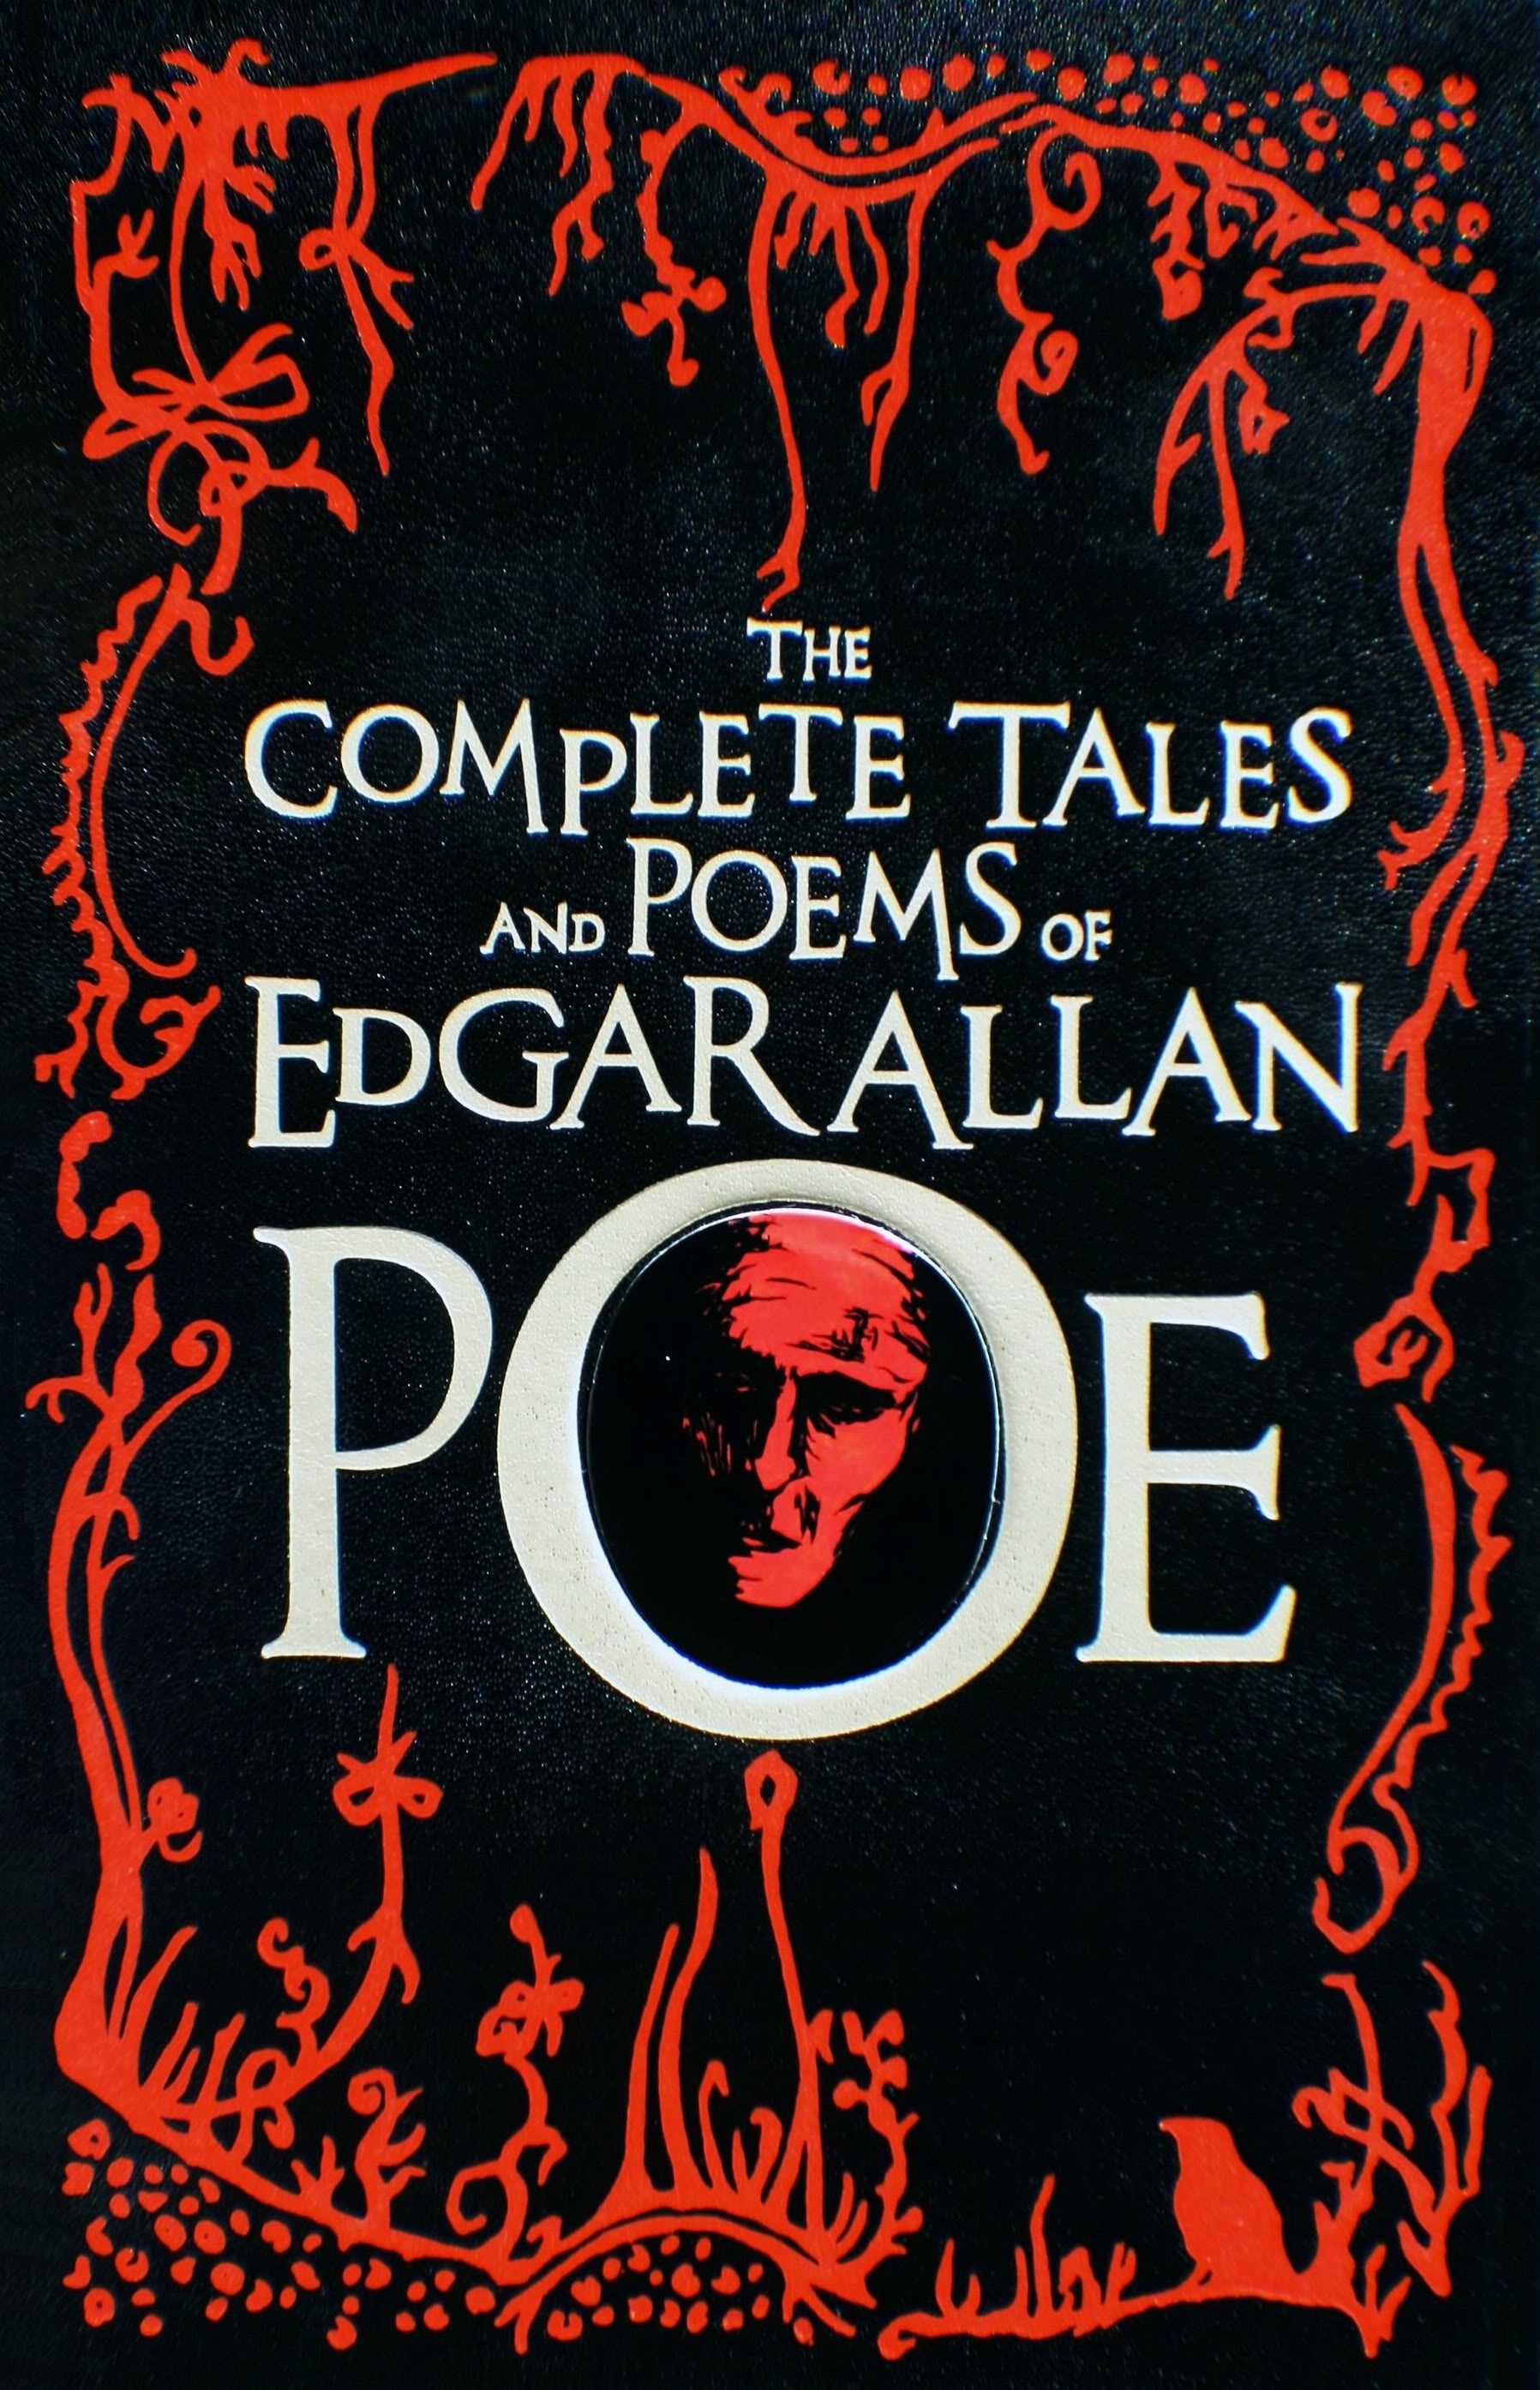 Edgar Allan Poe: Complete Tales and Poems (Amazon)